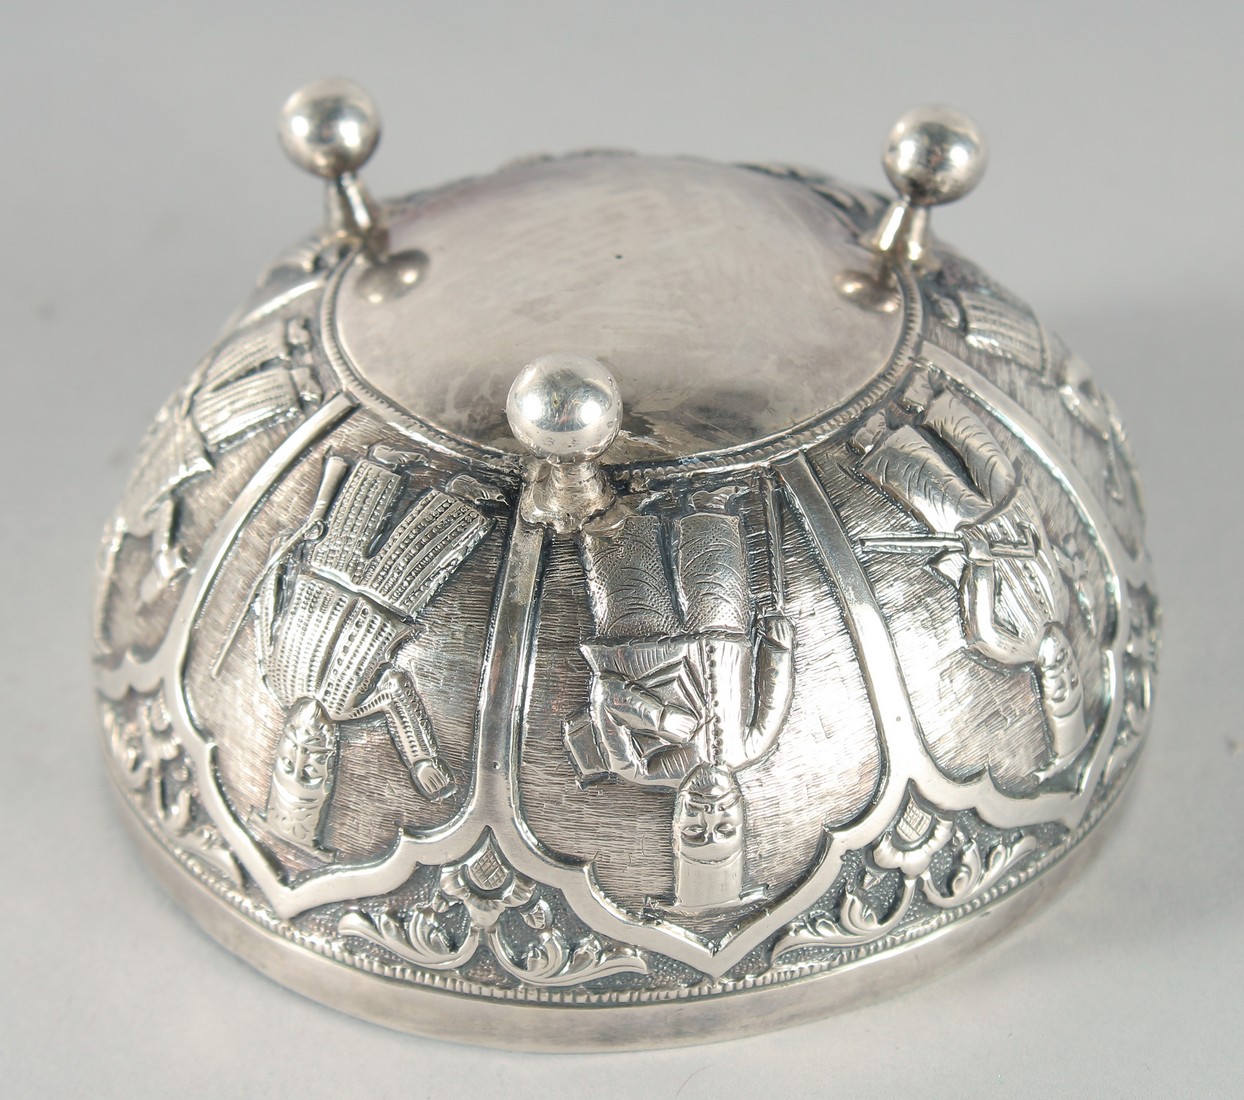 AN UNUSUAL 19TH CENTURY OTTOMAN GREEK OR ARMINIAN SILVER BOWL, with embossed and chased decoration - Image 5 of 5